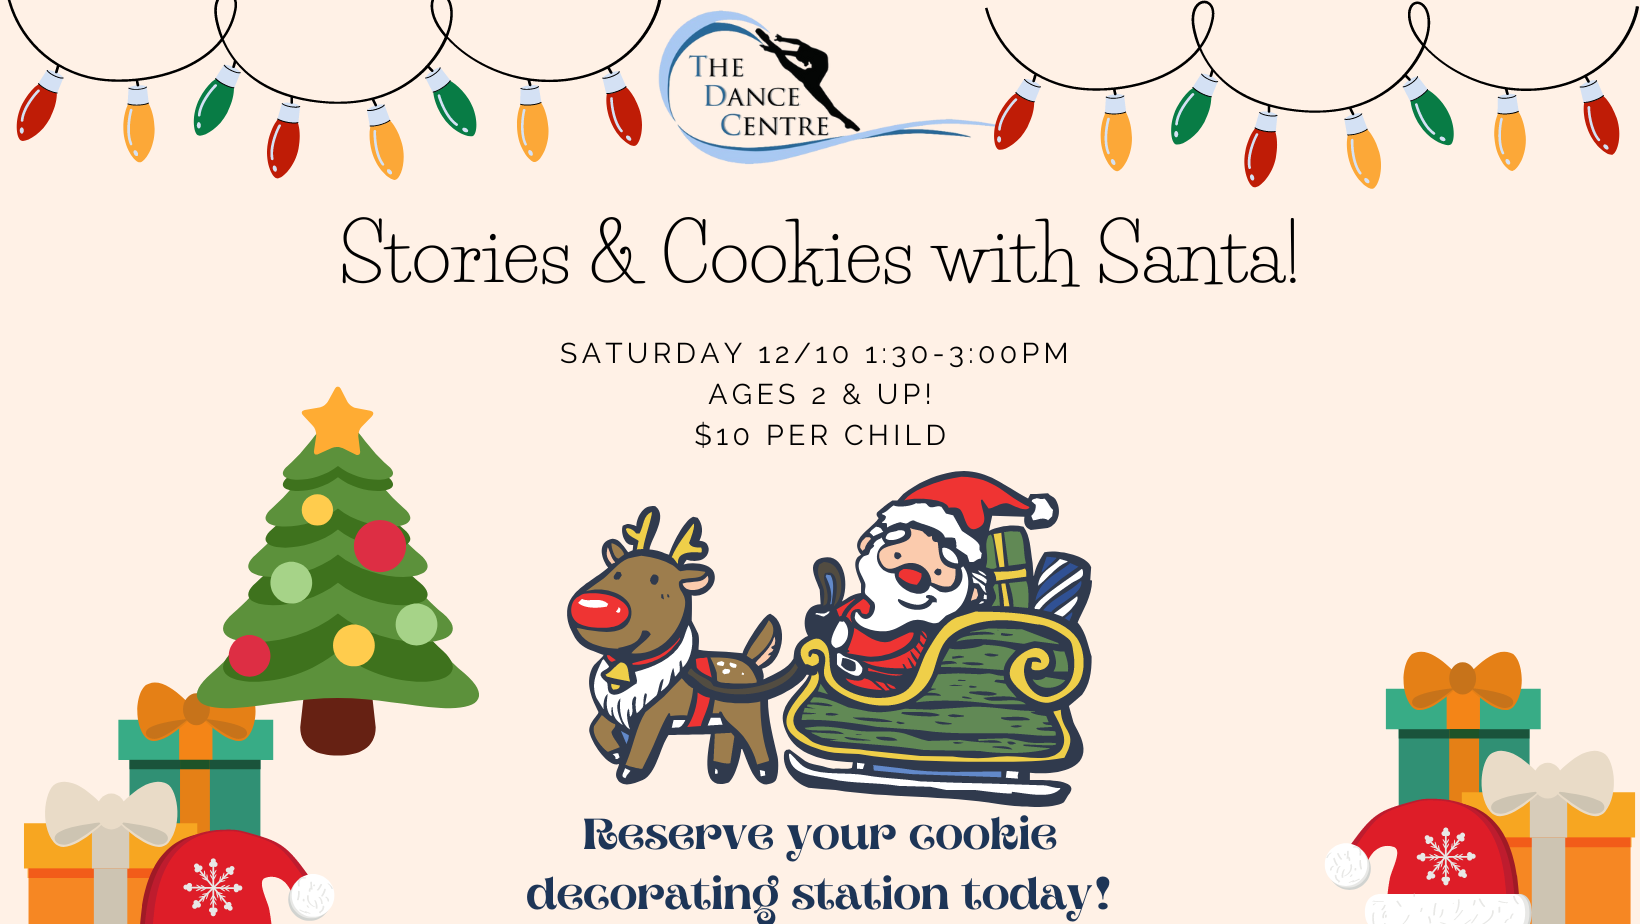 Reserve Your Cookie Decorating Station Today!